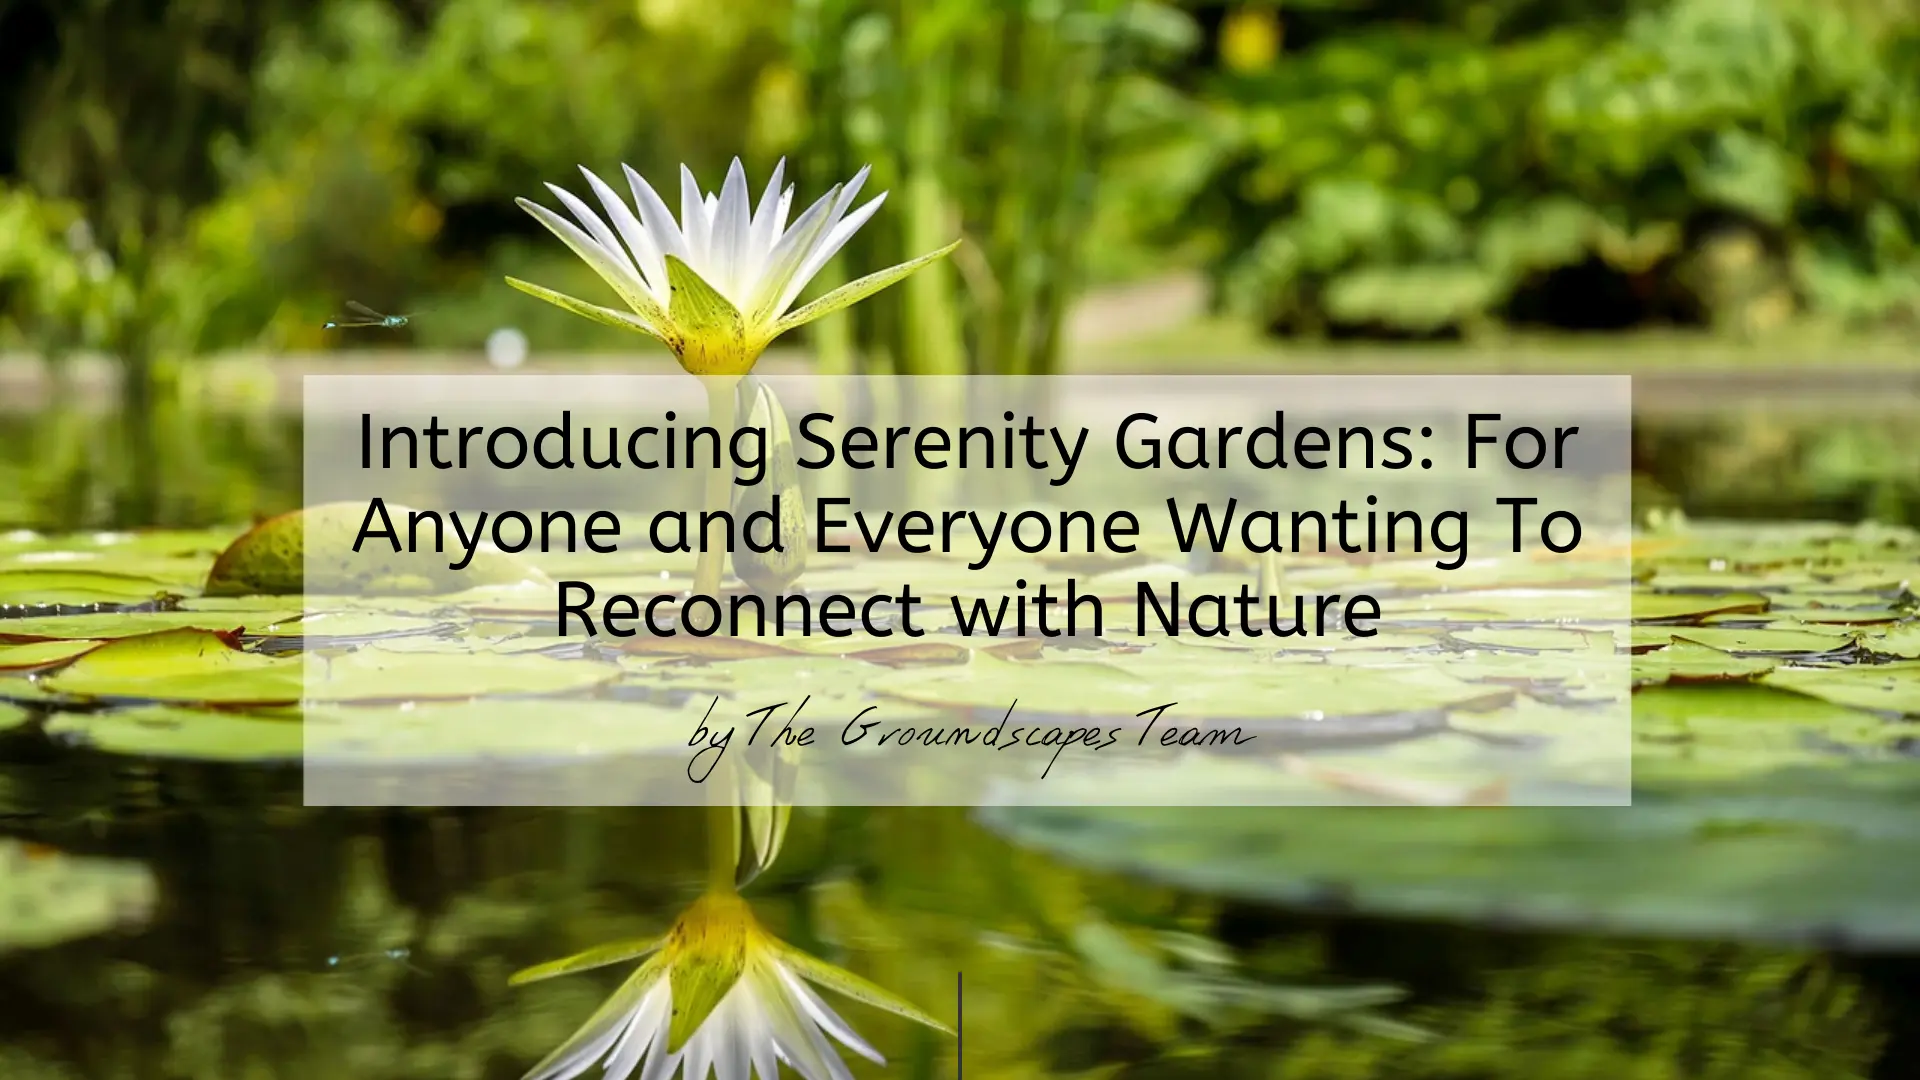 Introducing Serenity Gardens: For Anyone and Everyone Wanting To Reconnect with Nature